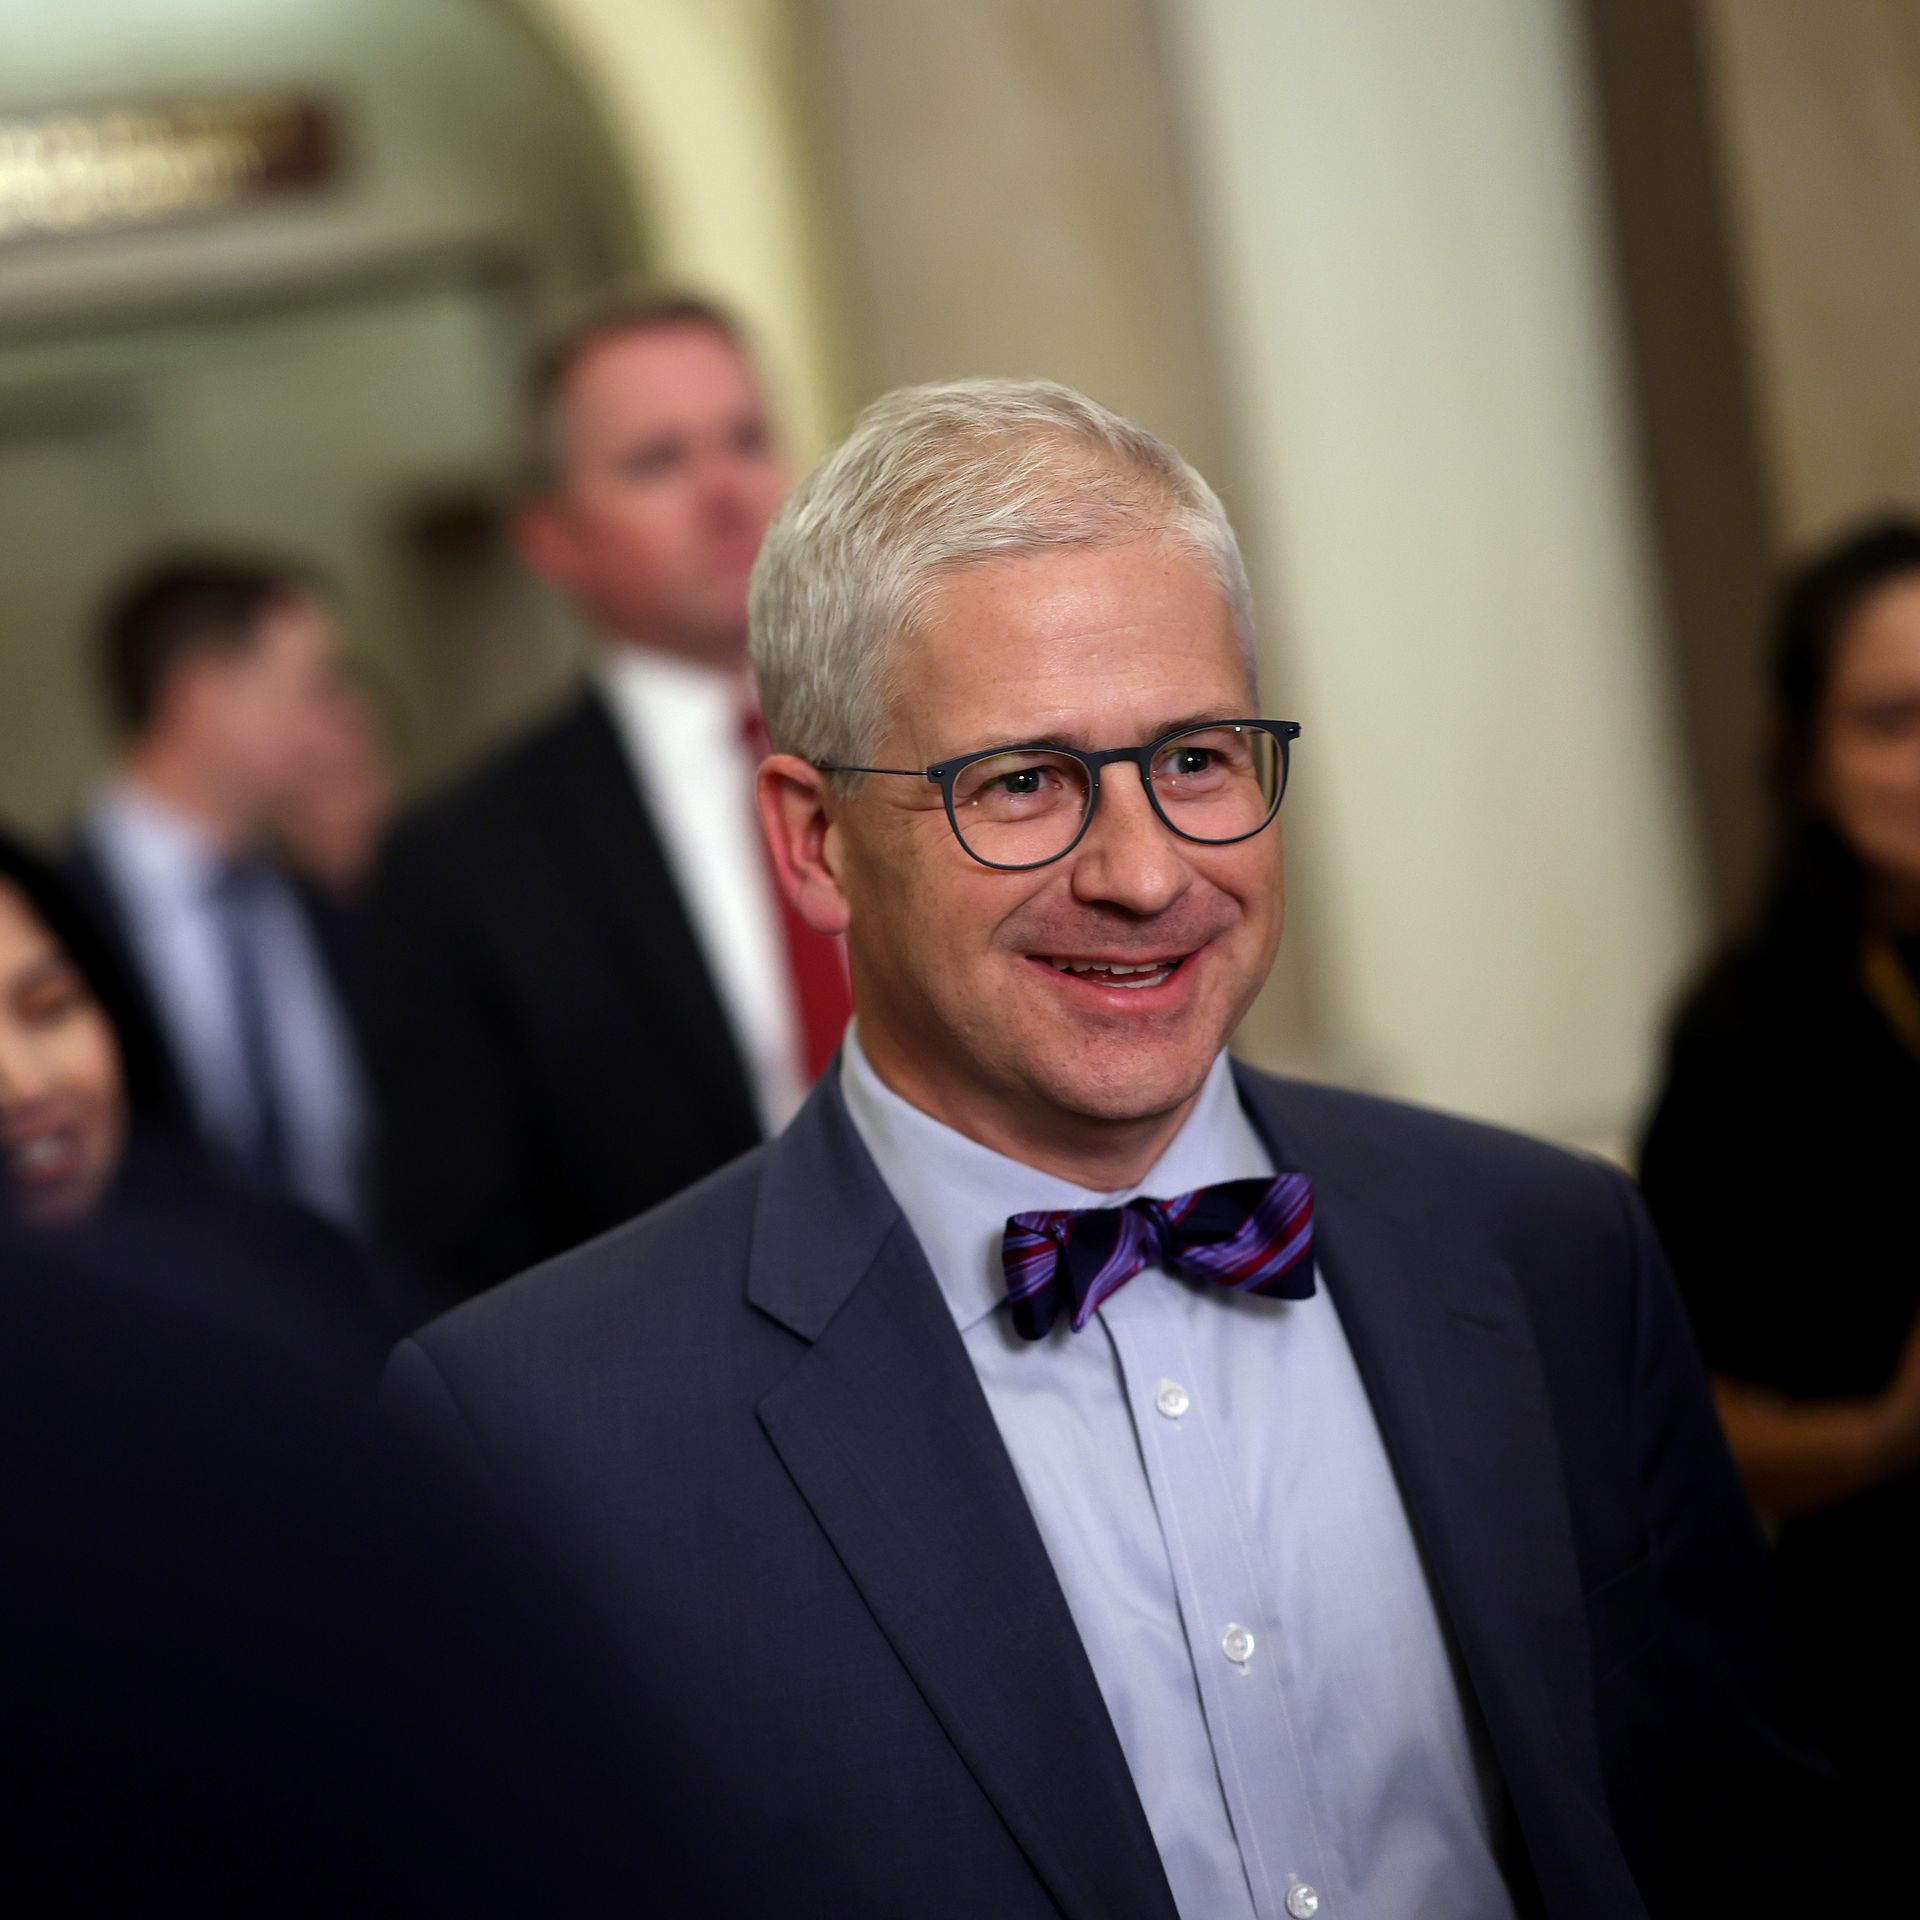 Who is Patrick McHenry, the temporary House speaker